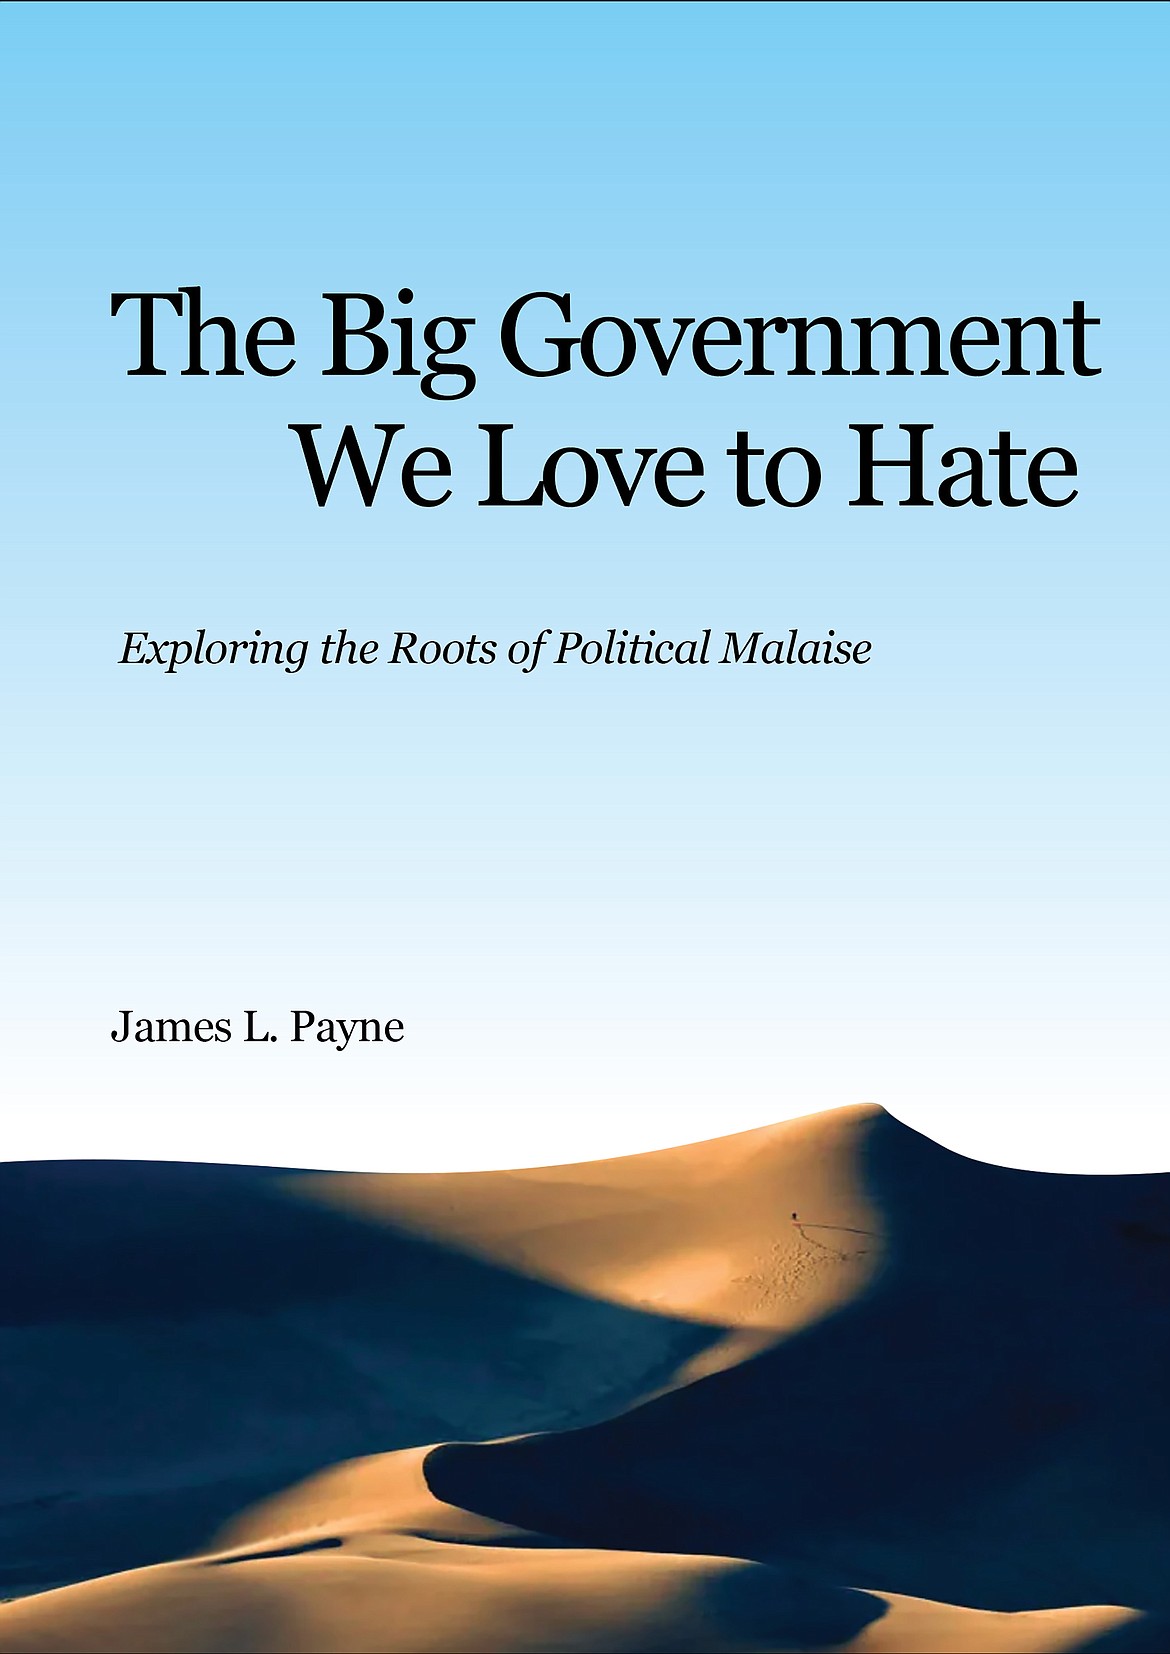 The cover of local author Jim Payne's new book, “The Big Government We Love to Hate”.